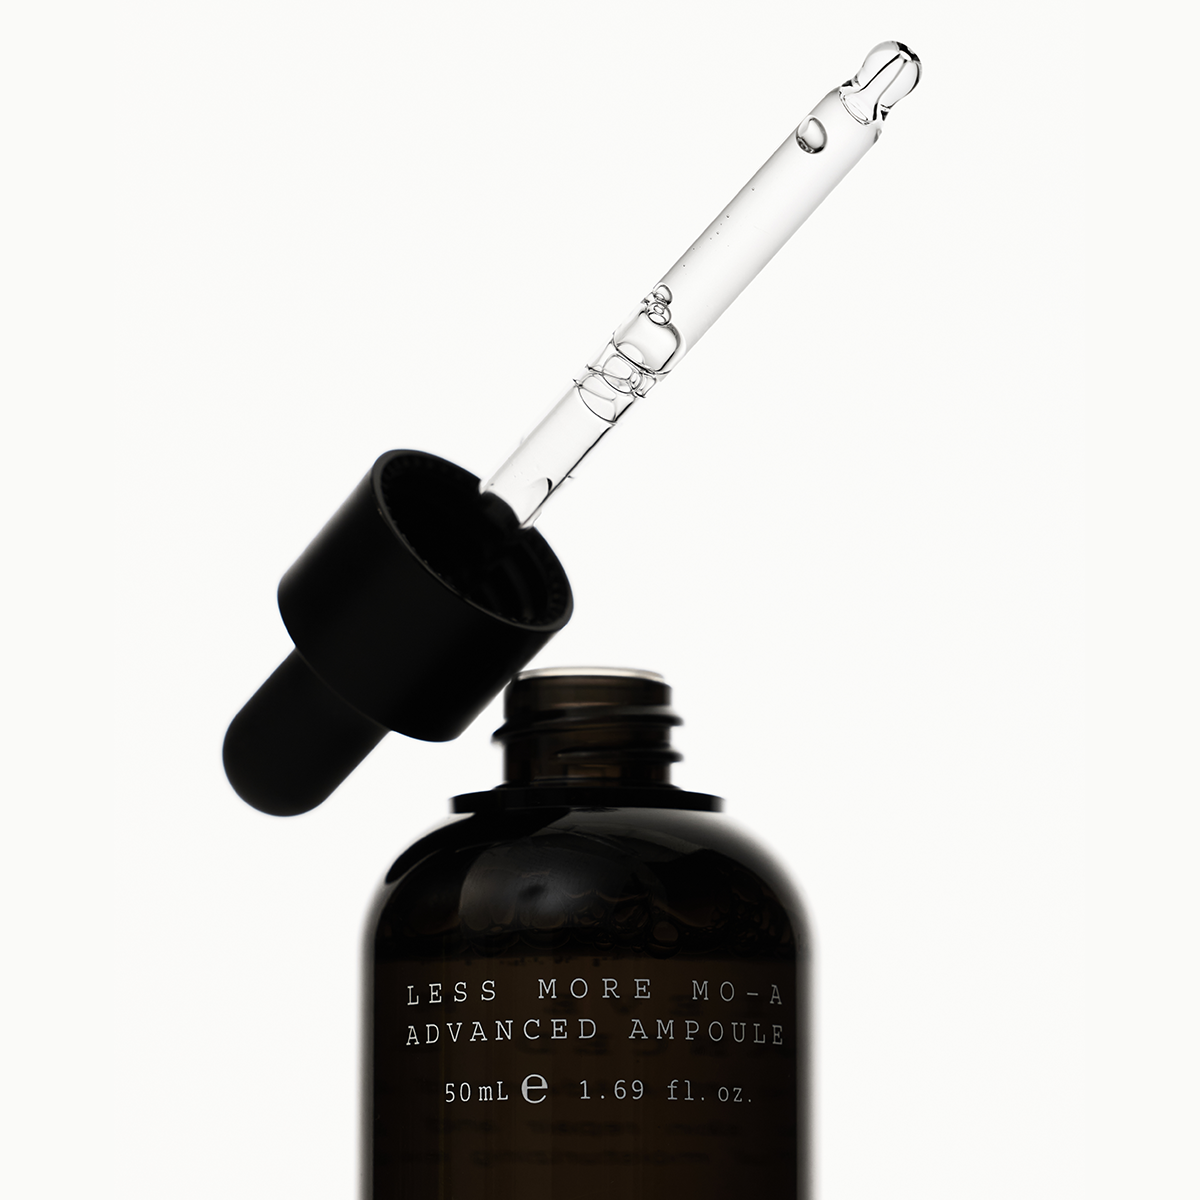 An image showing the Less More MO-A Advanced Ampoule from Hanisul.